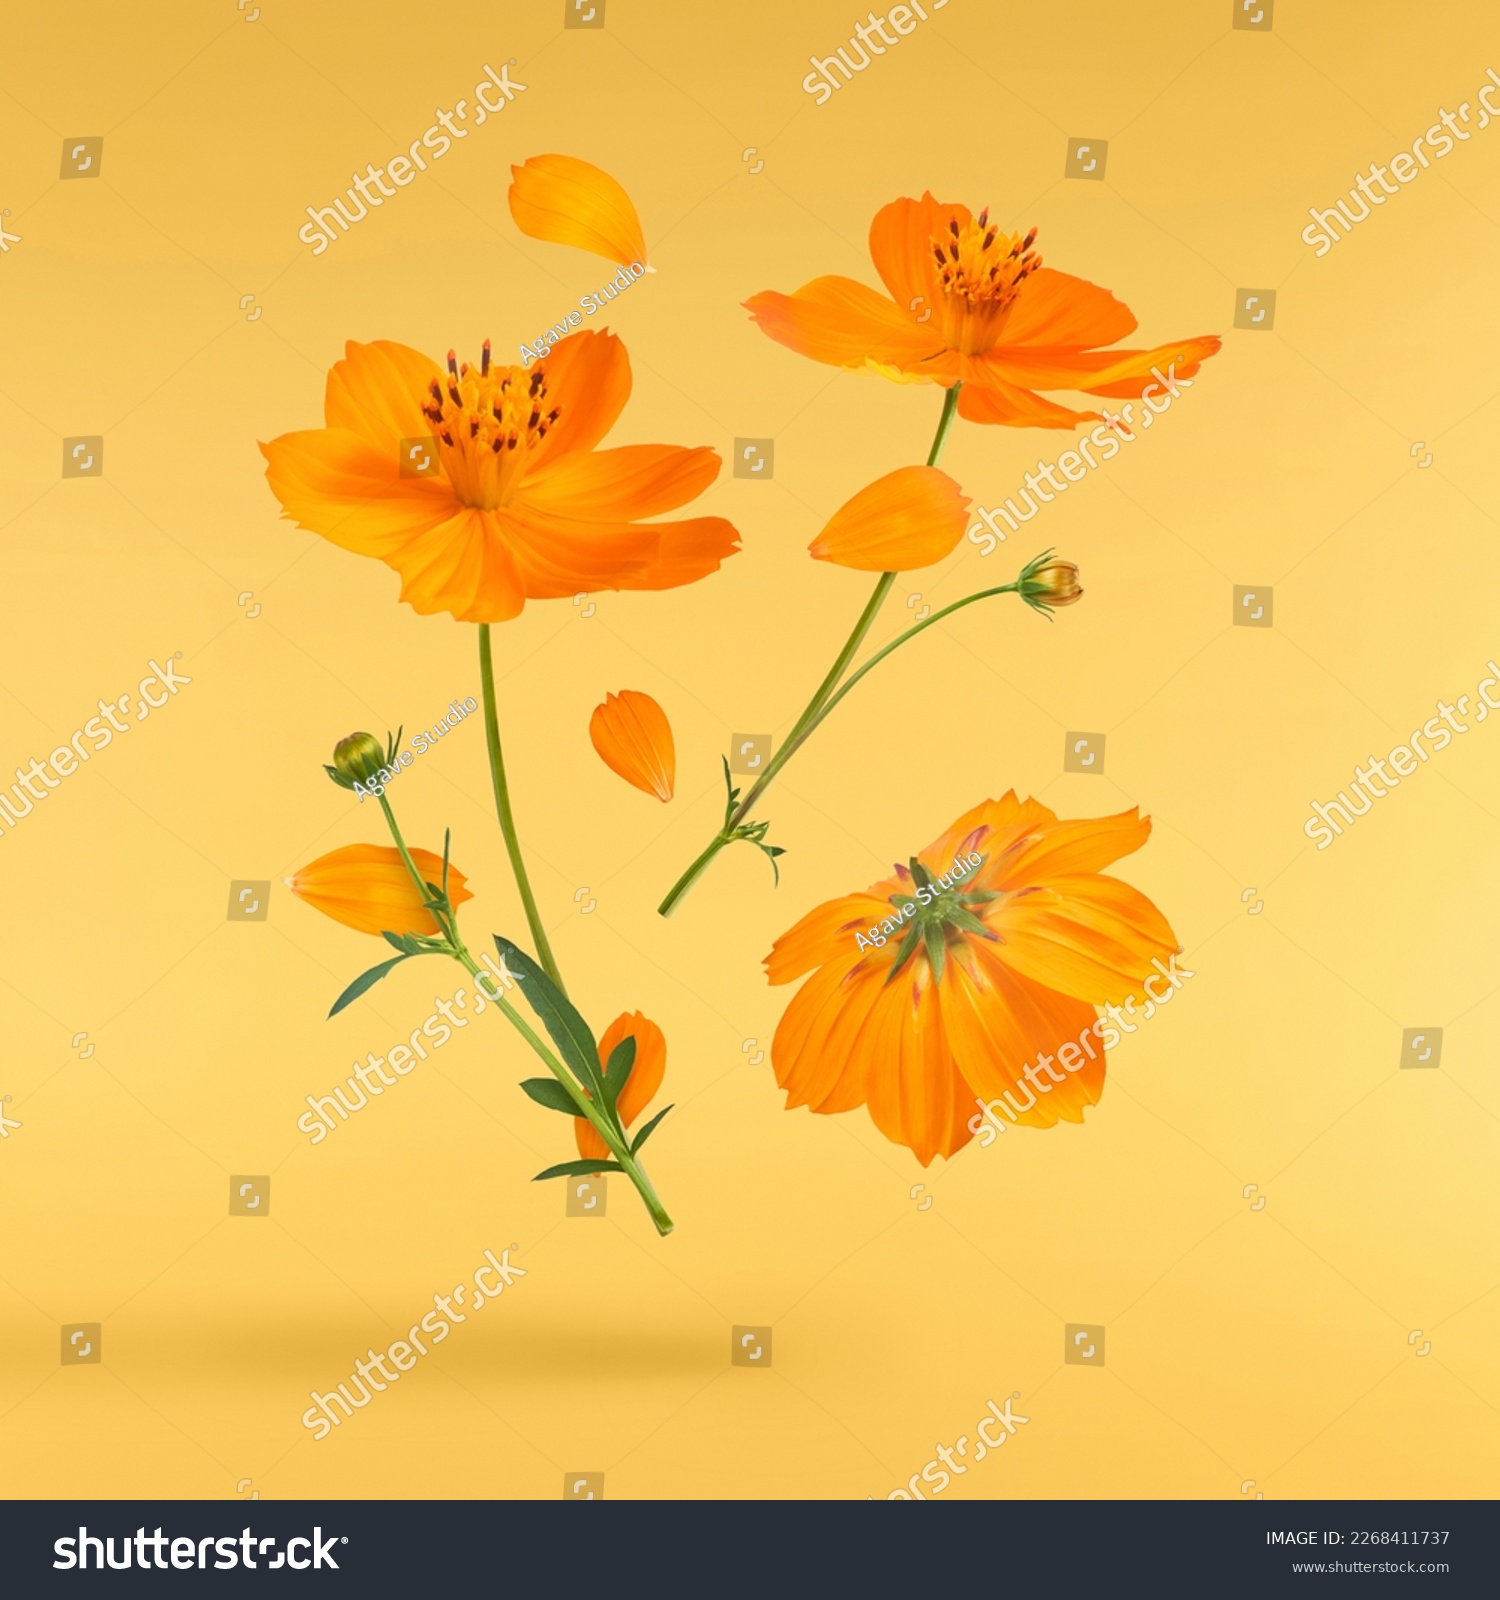 Beautiful orange cosmos flower falling in the air isolated on yellow background. Levitation or zero gravity flowers conception. Creative floral layout. High resolution image #2268411737